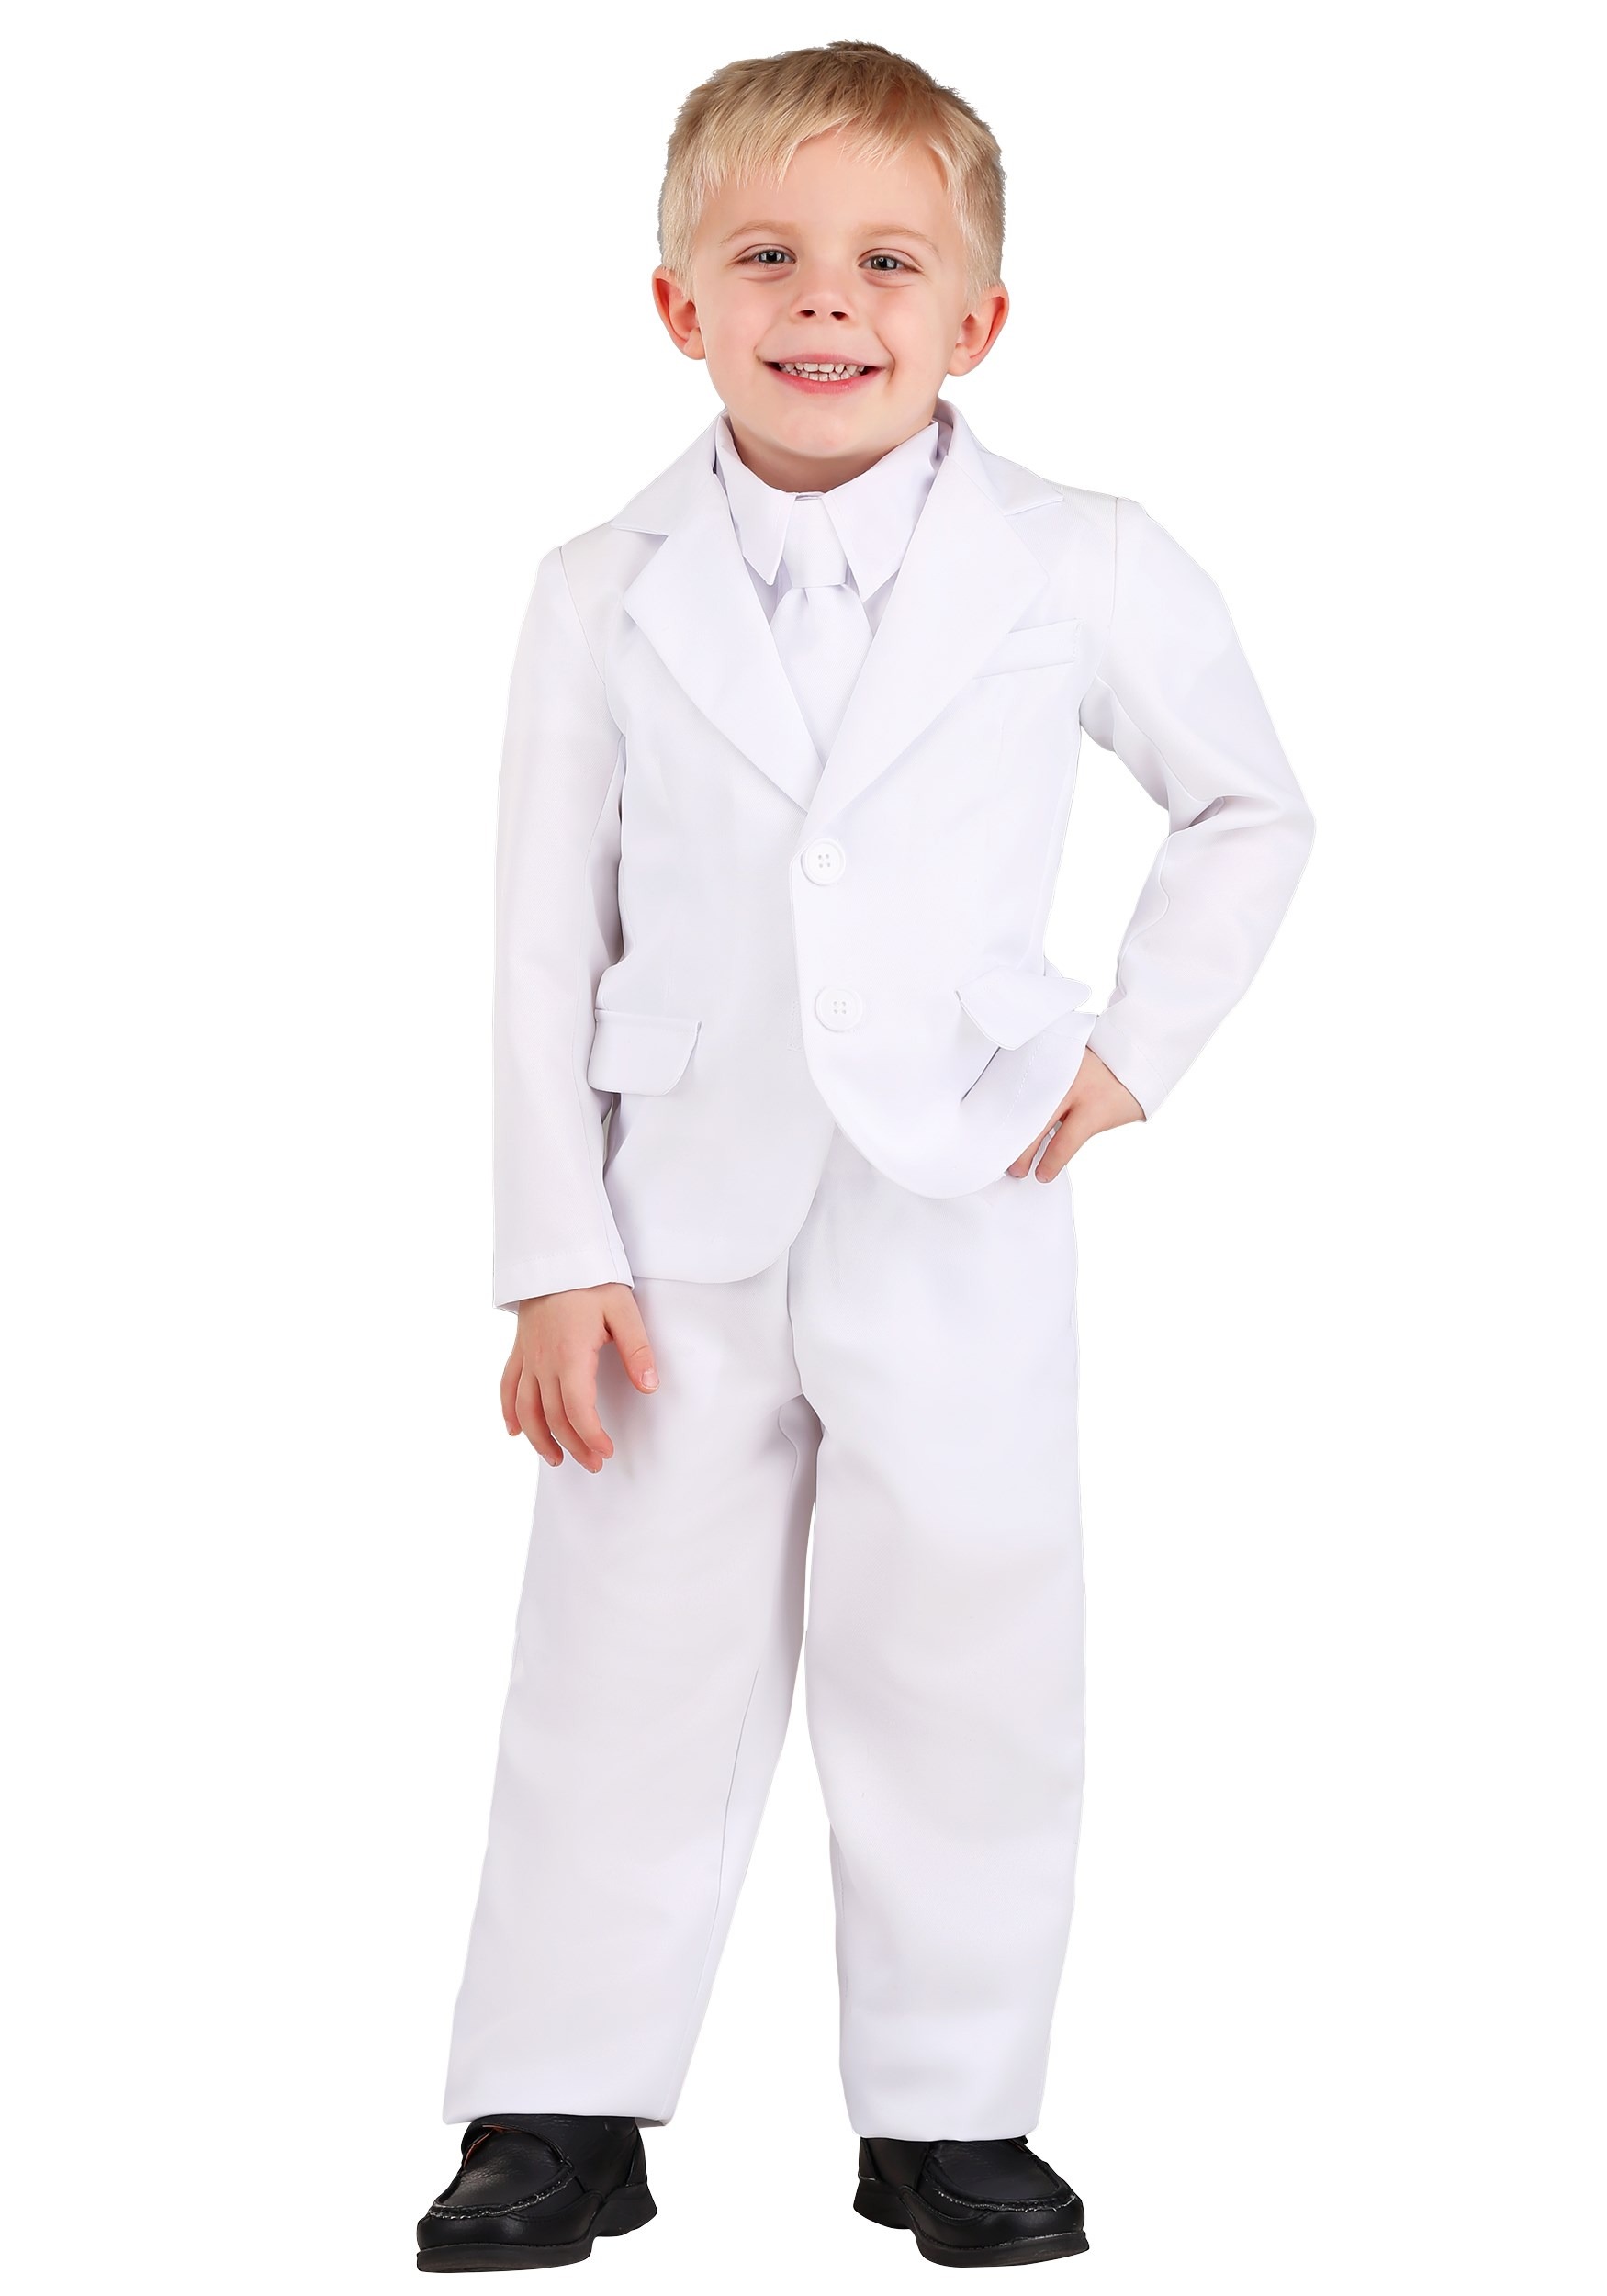 Toddler’s White Suit Costume